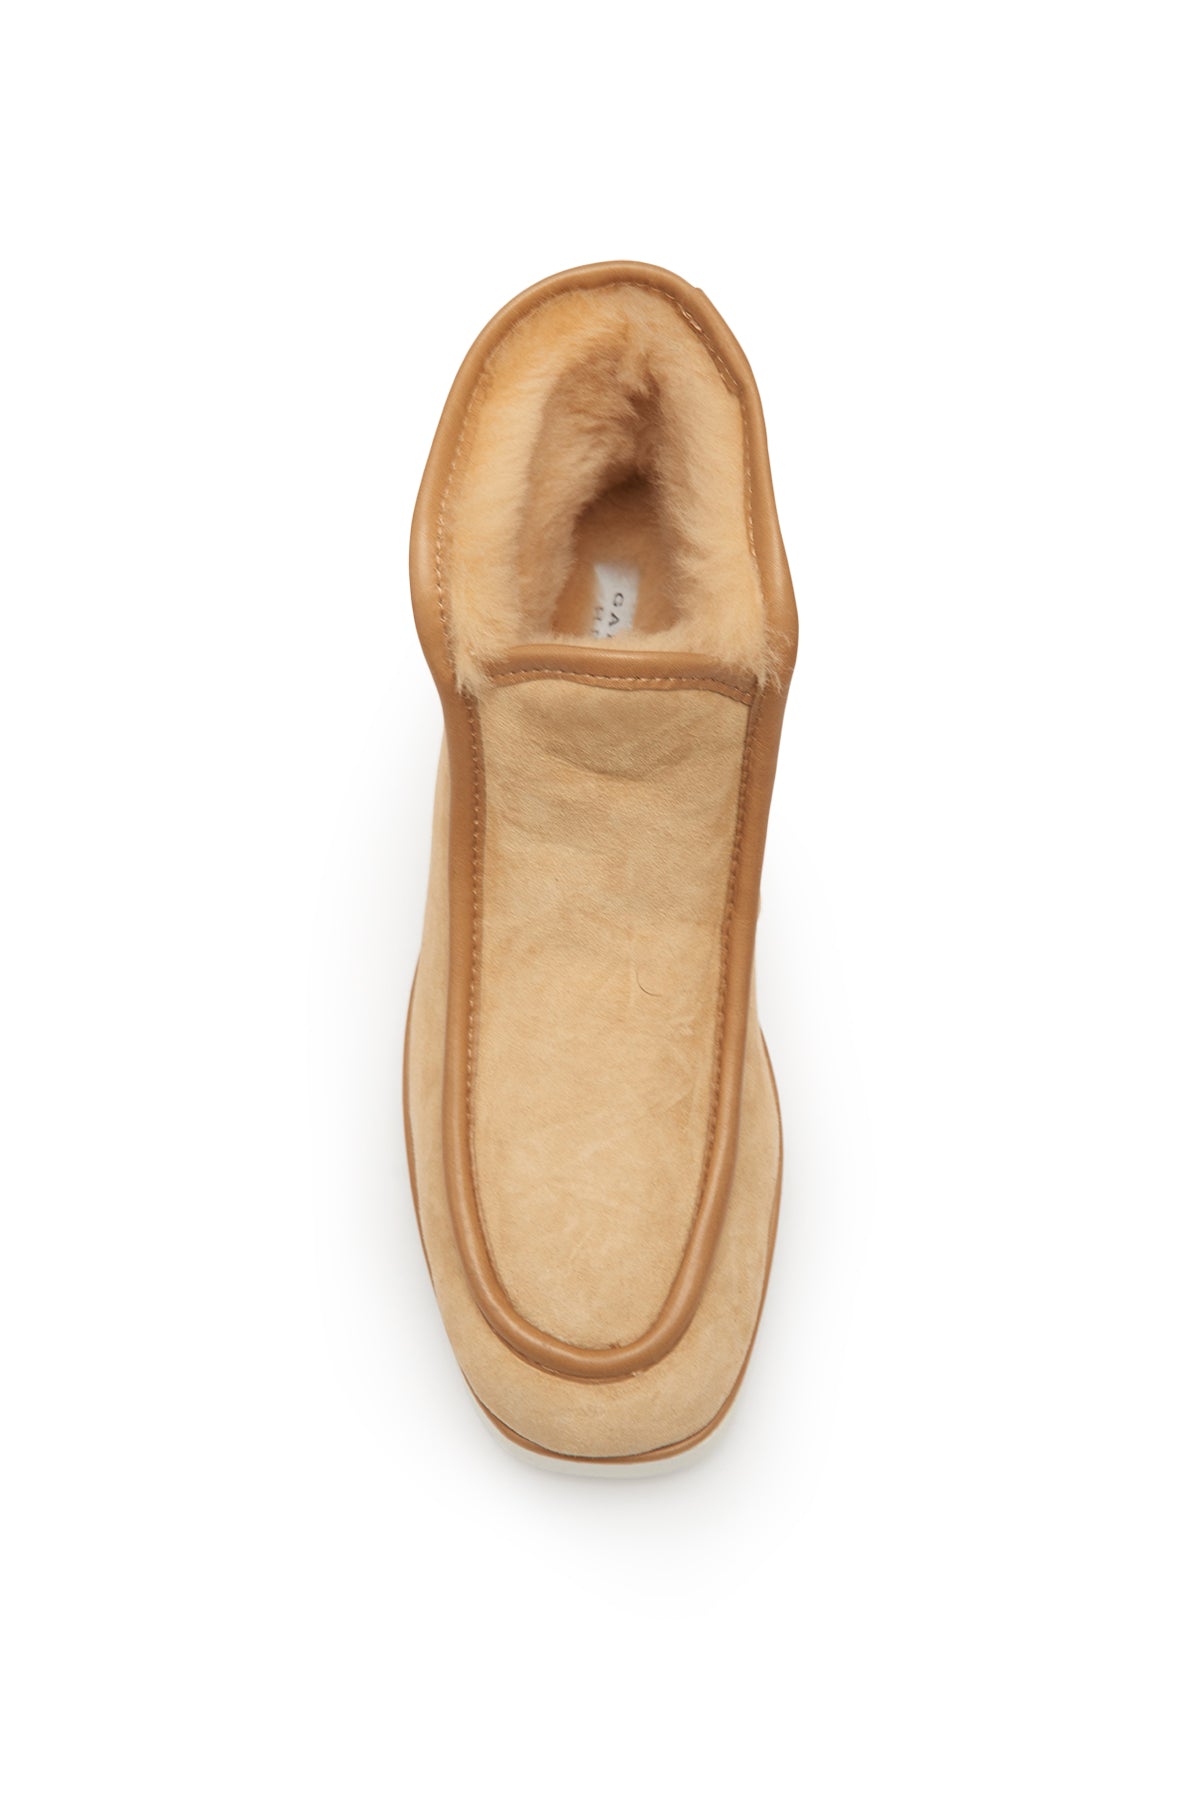 Tyga Shearling Boot in Camel Leather